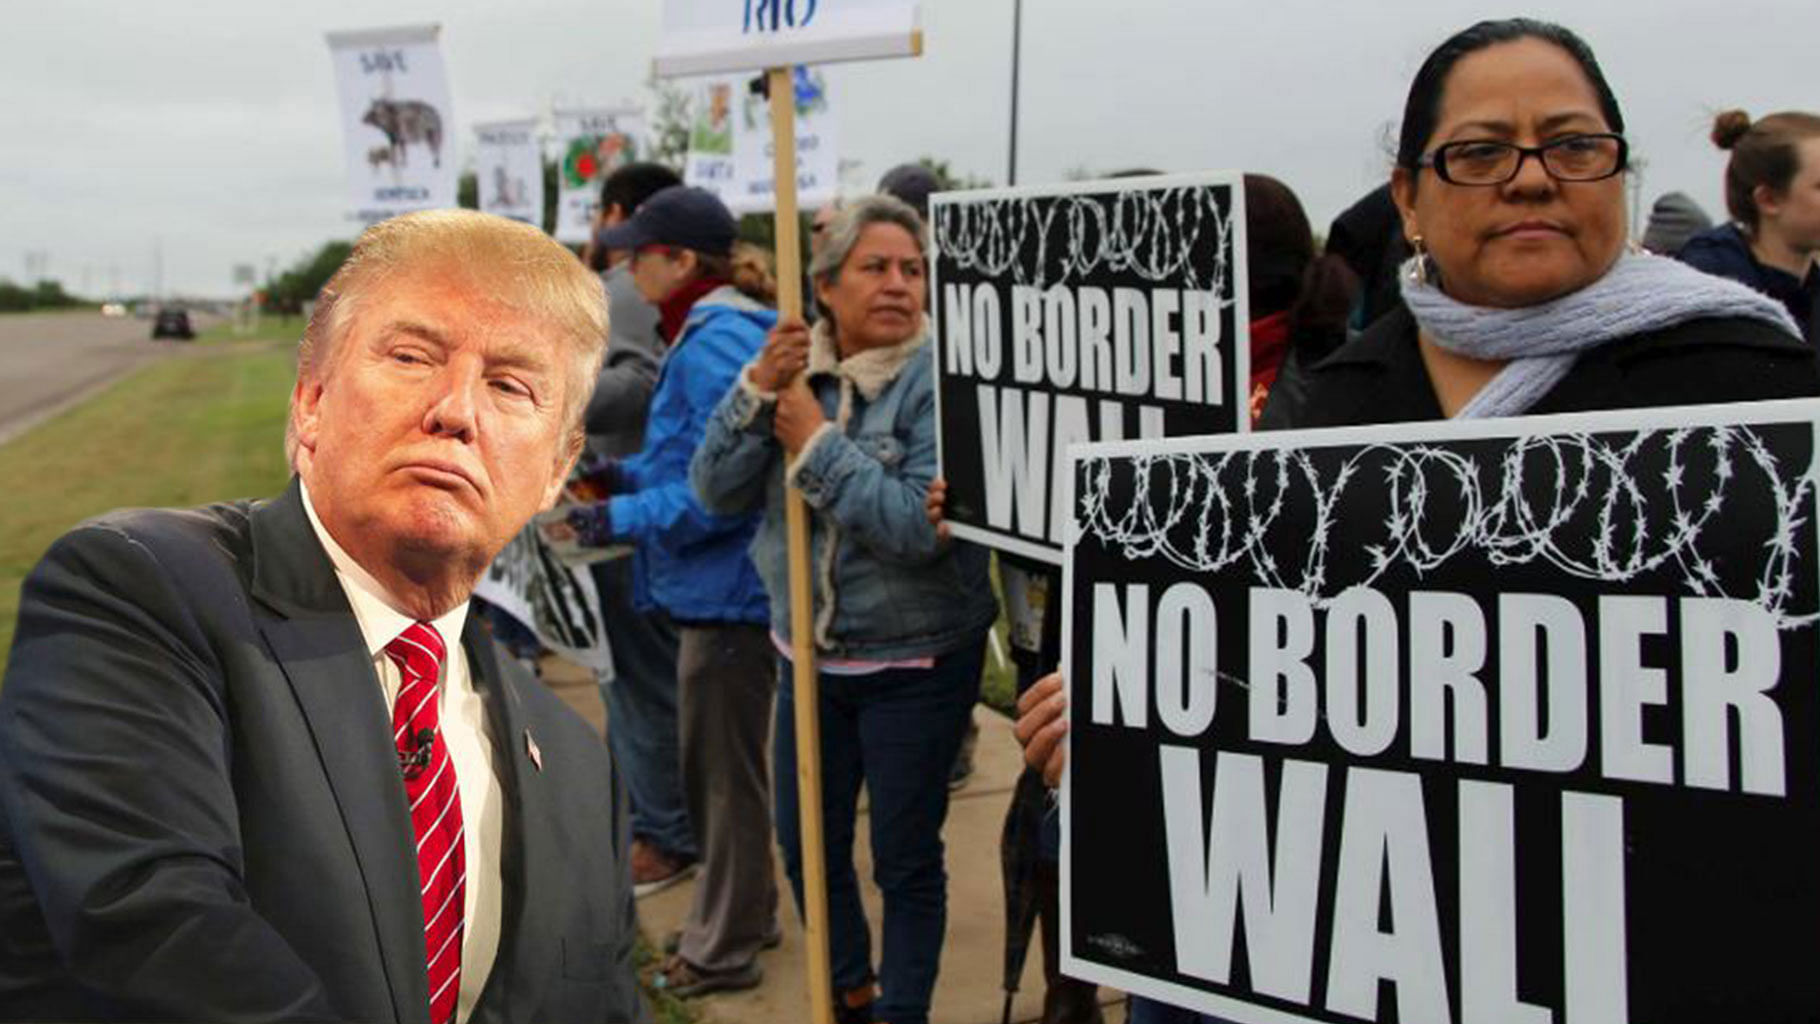 Protesters take to streets against Donald Trump’s demand for a border wall.